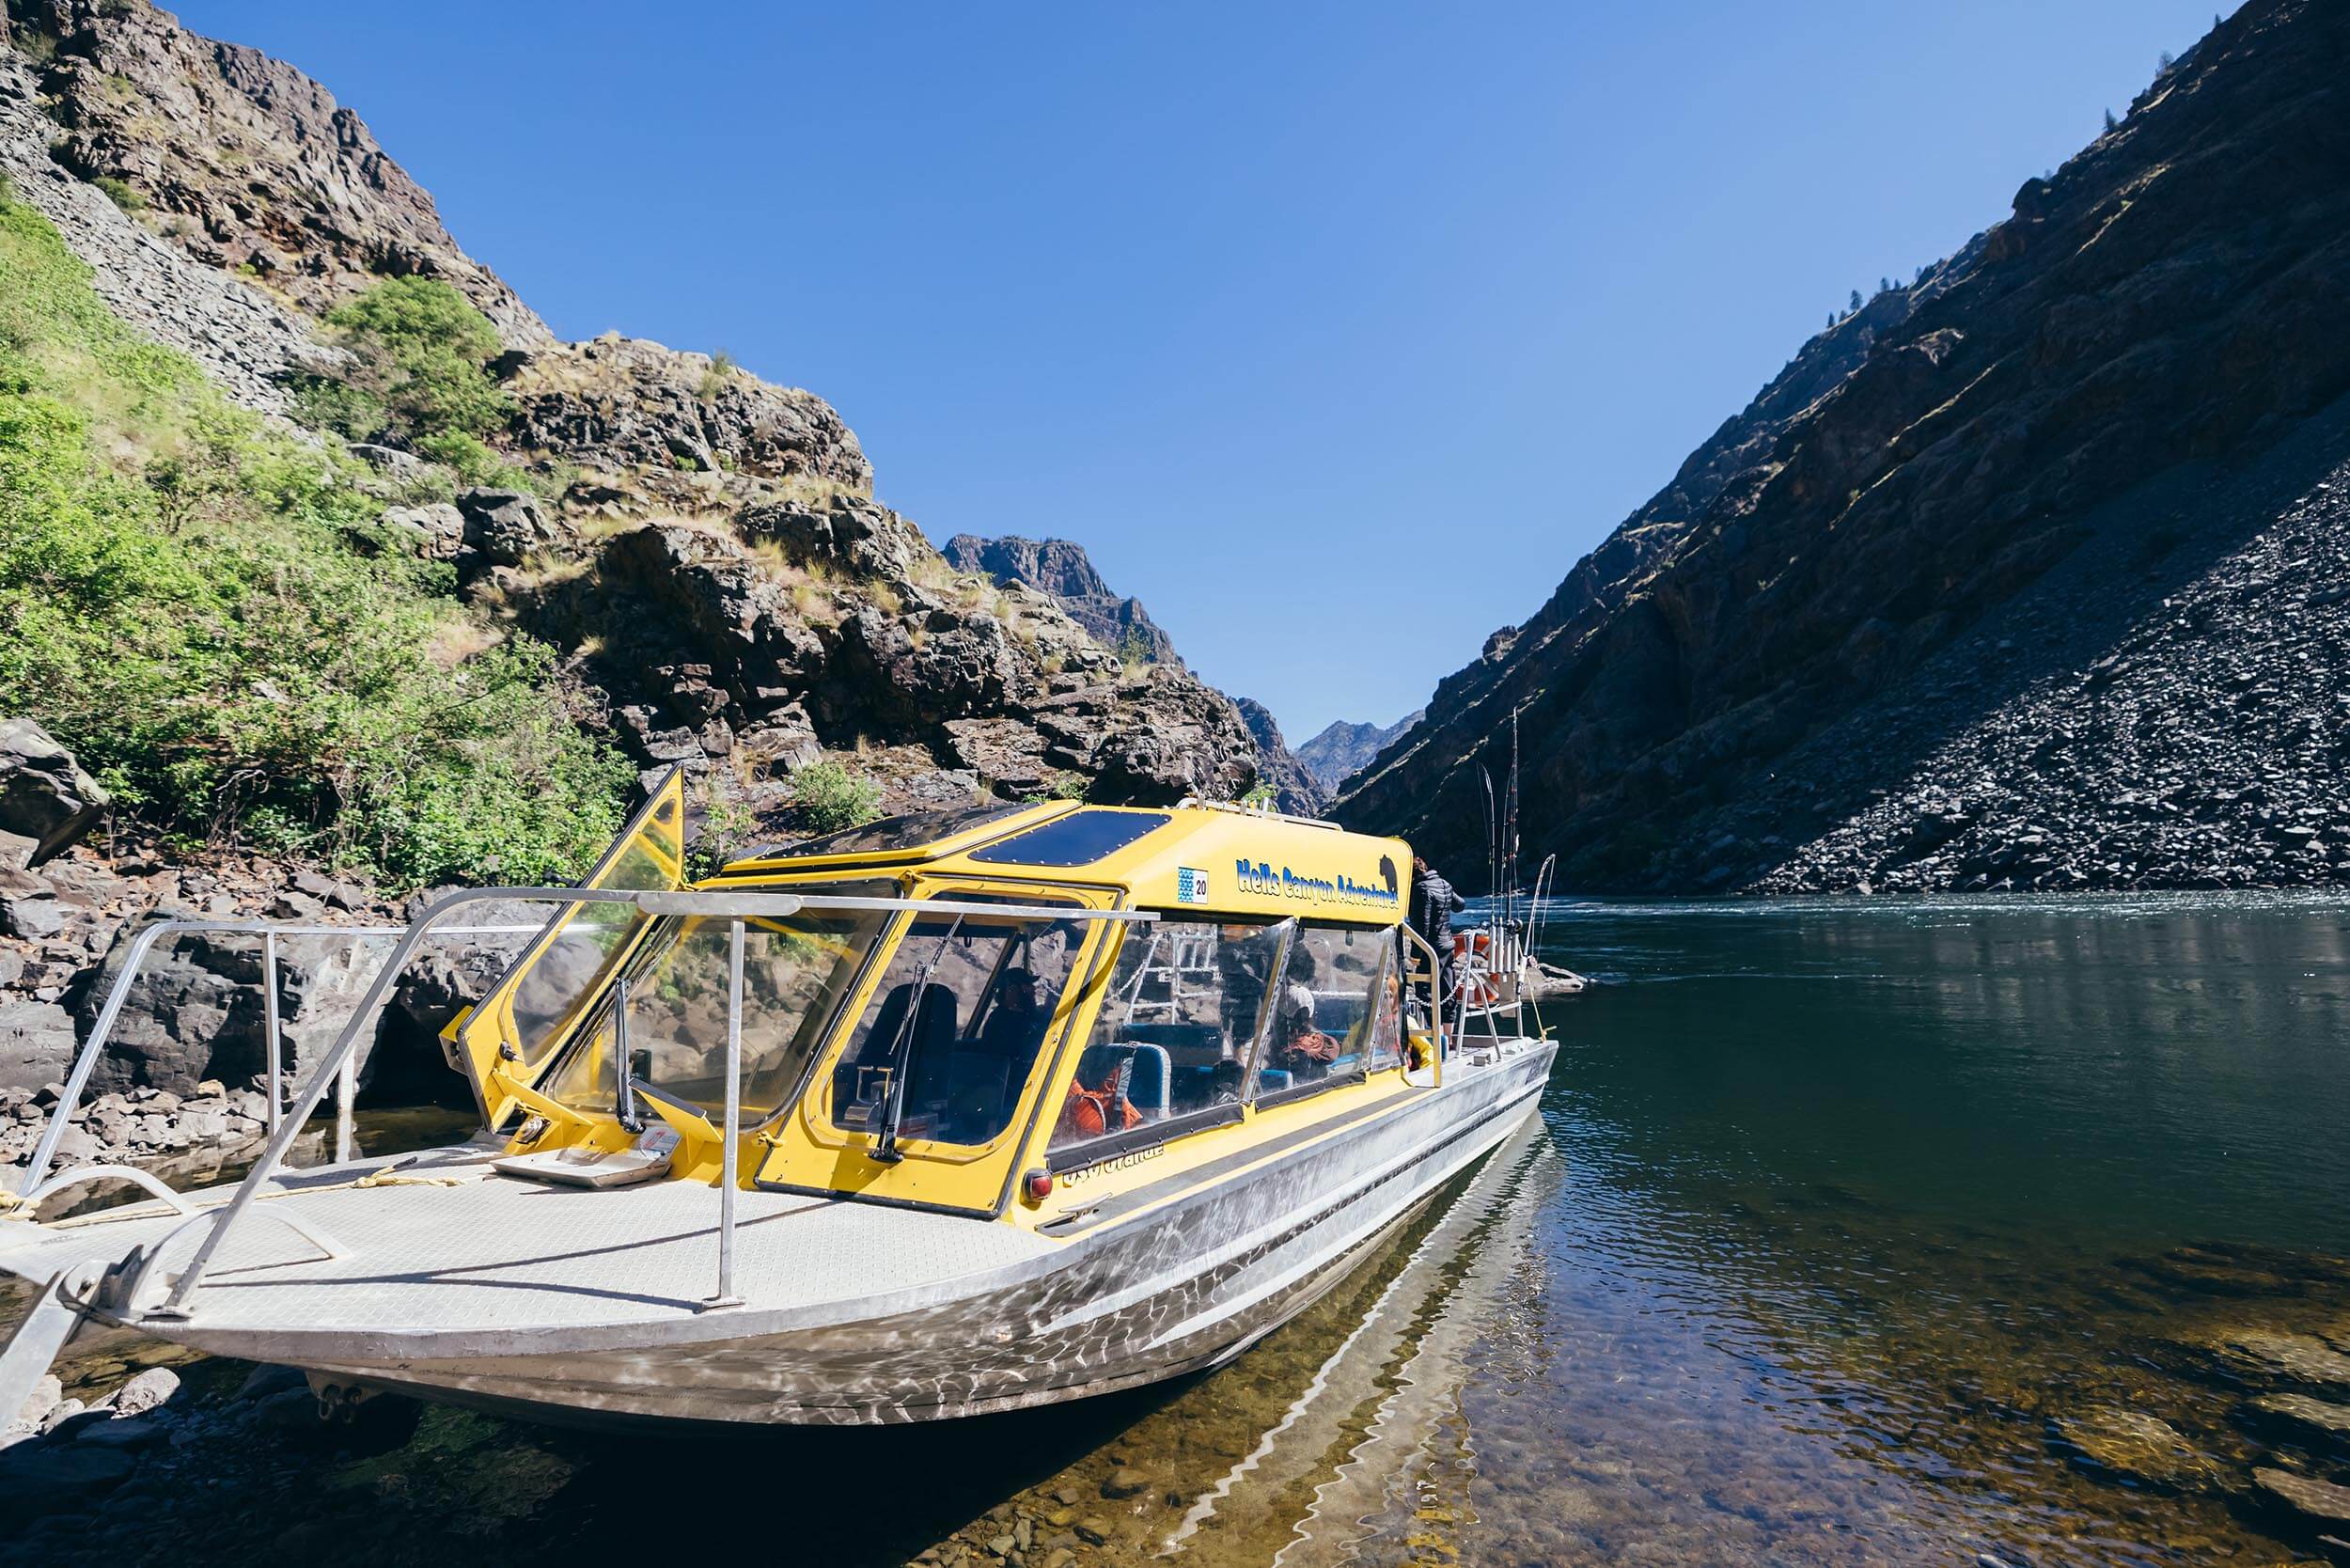 closeup of a jet boat on a river within a canyon